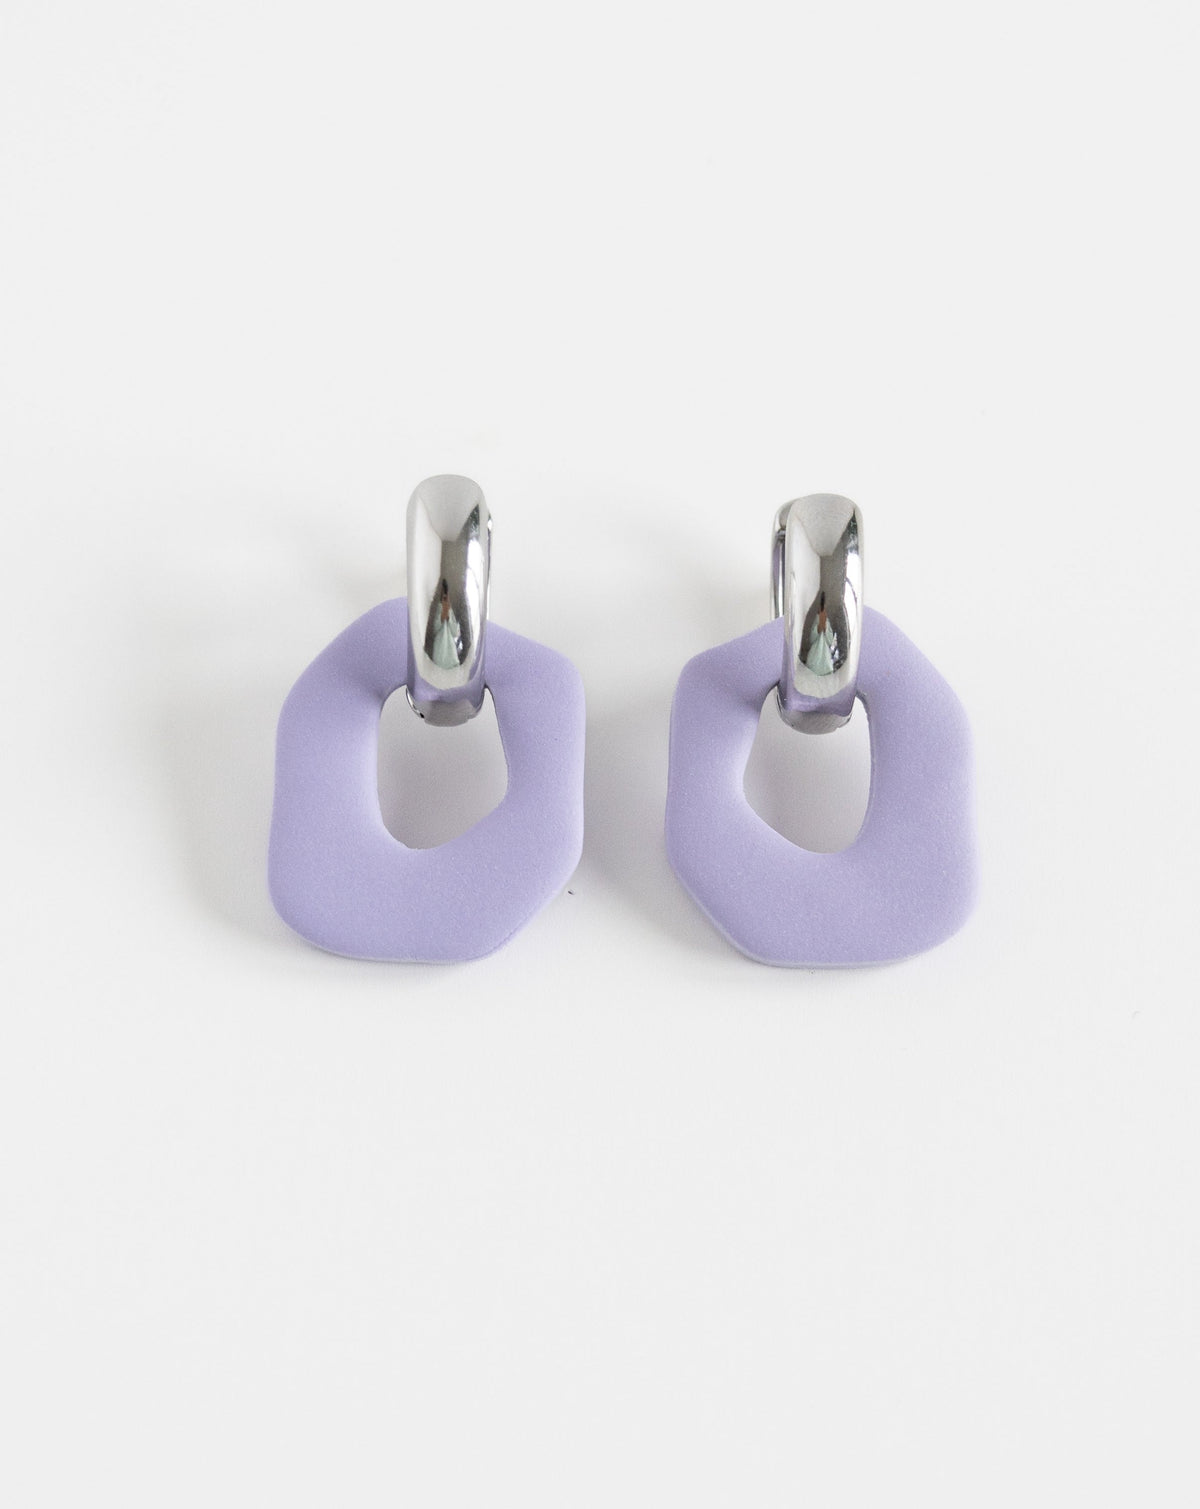 Darien earrings in Lilac color with silver hoops, front view